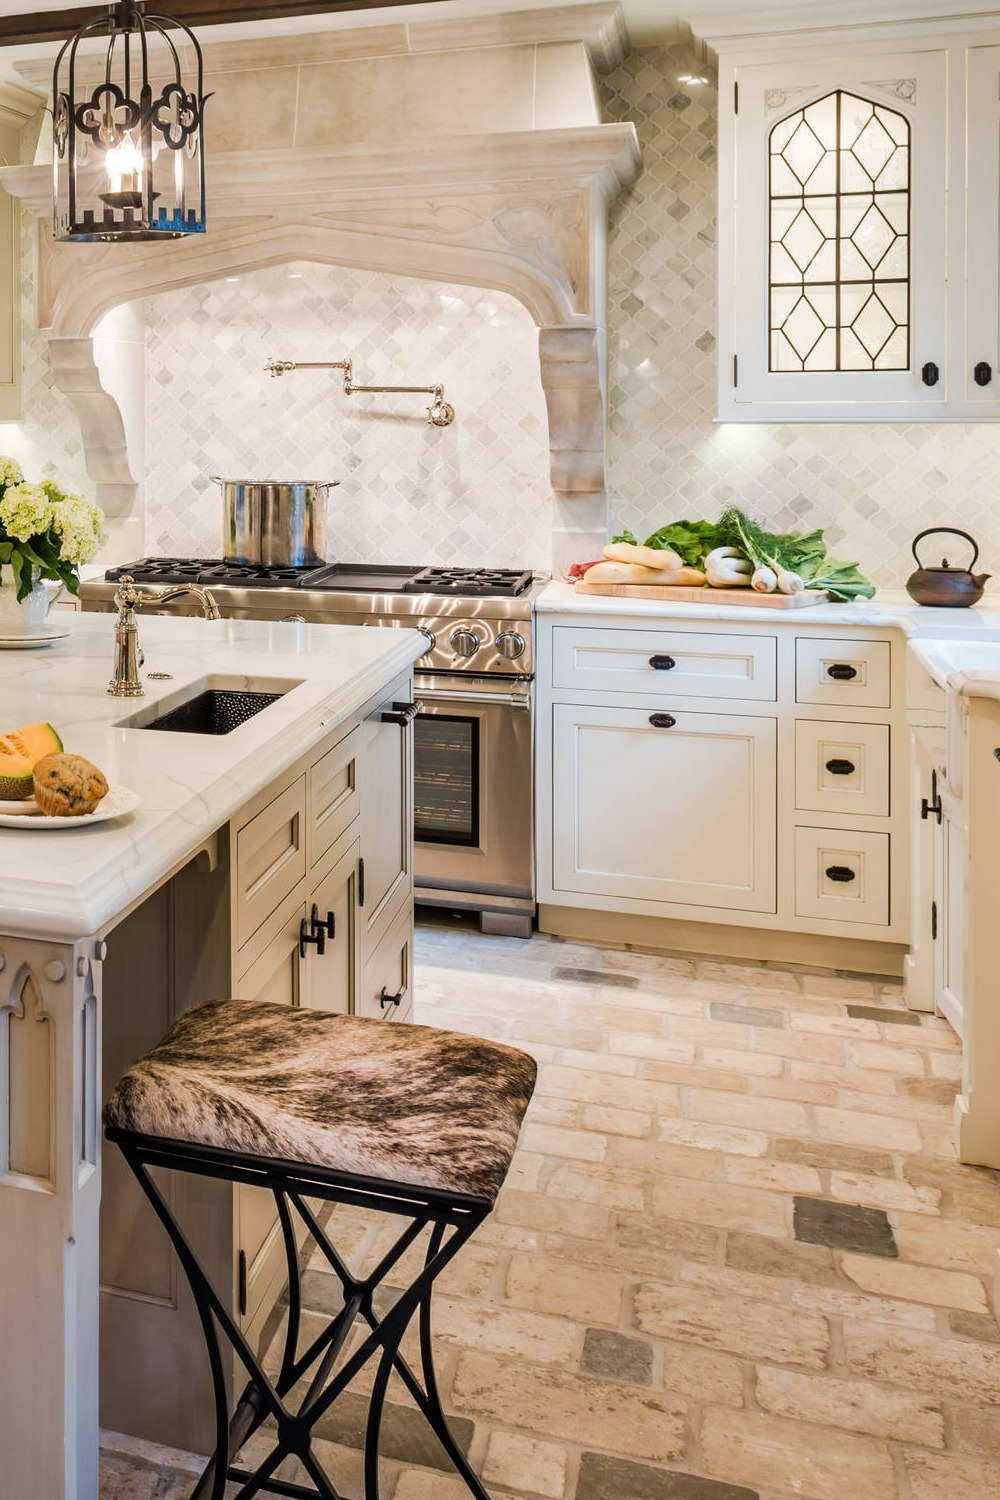 French Country White Kitchen Cabinet Space White Cabinets Black Hardware Travertine Floor